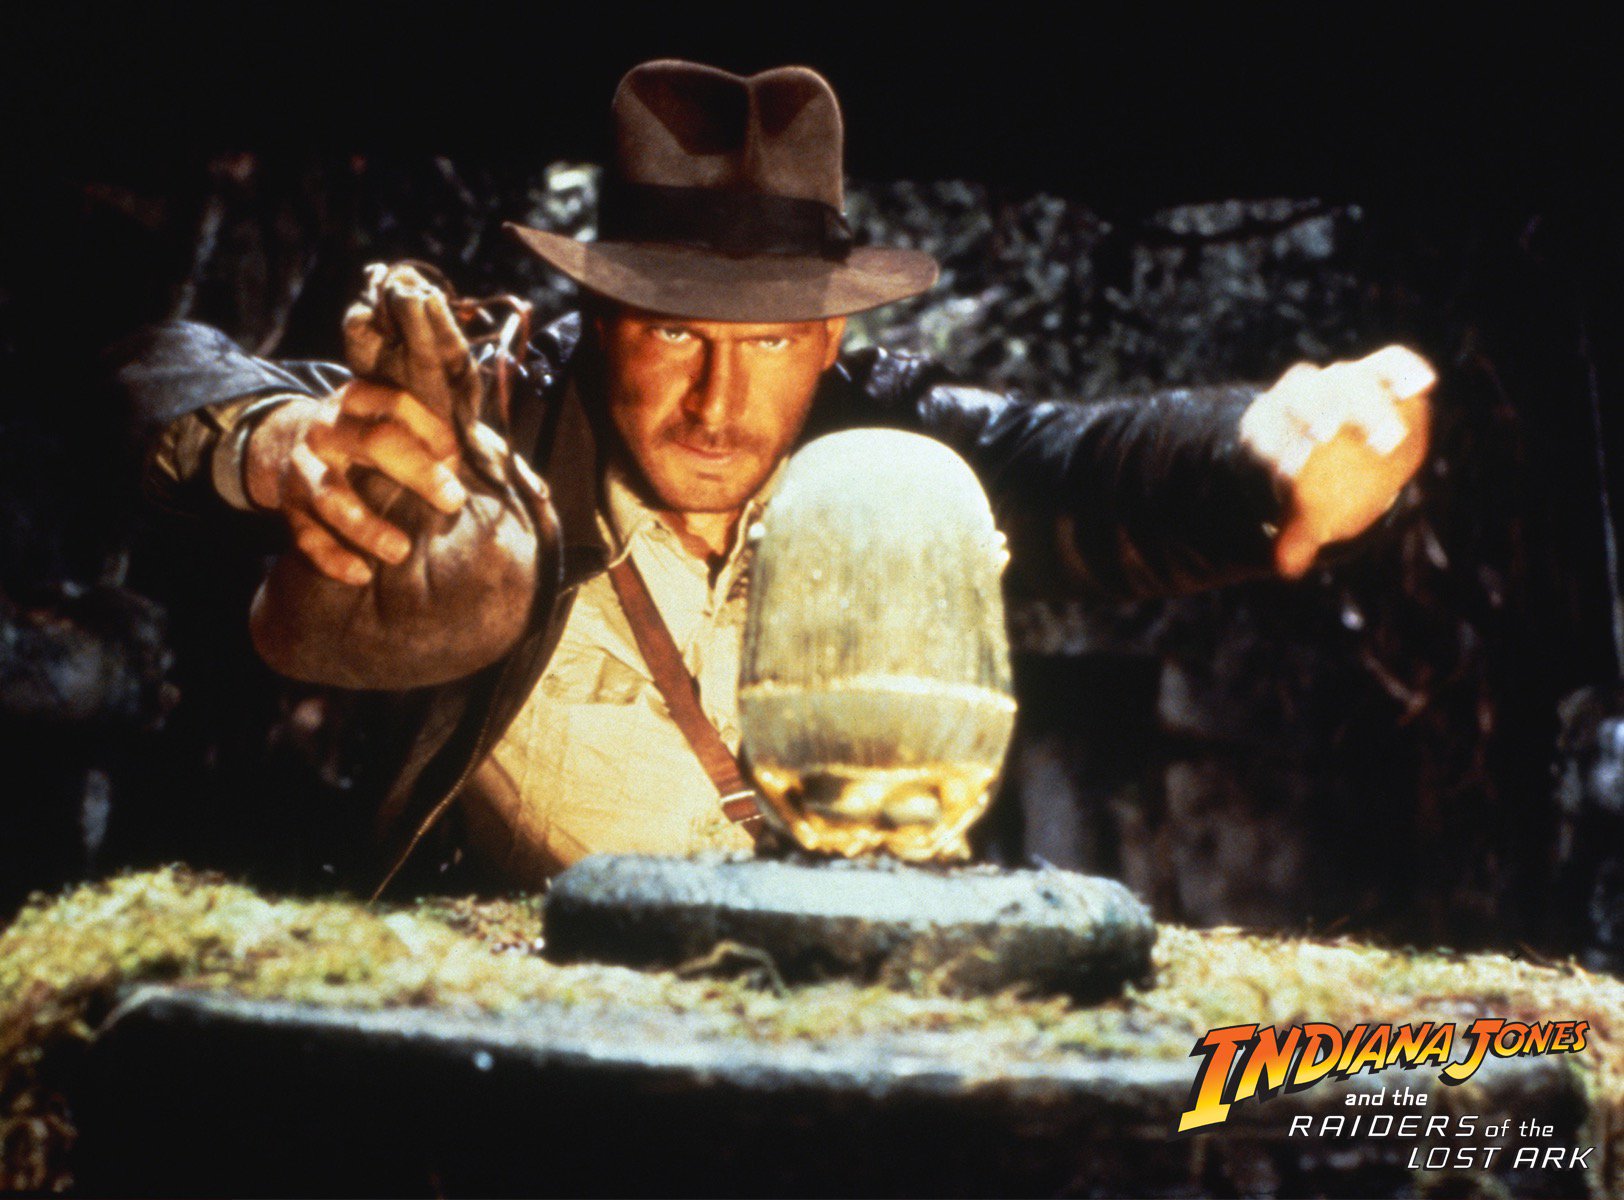 Wishing the one and only Harrison Ford, a Happy Birthday! 